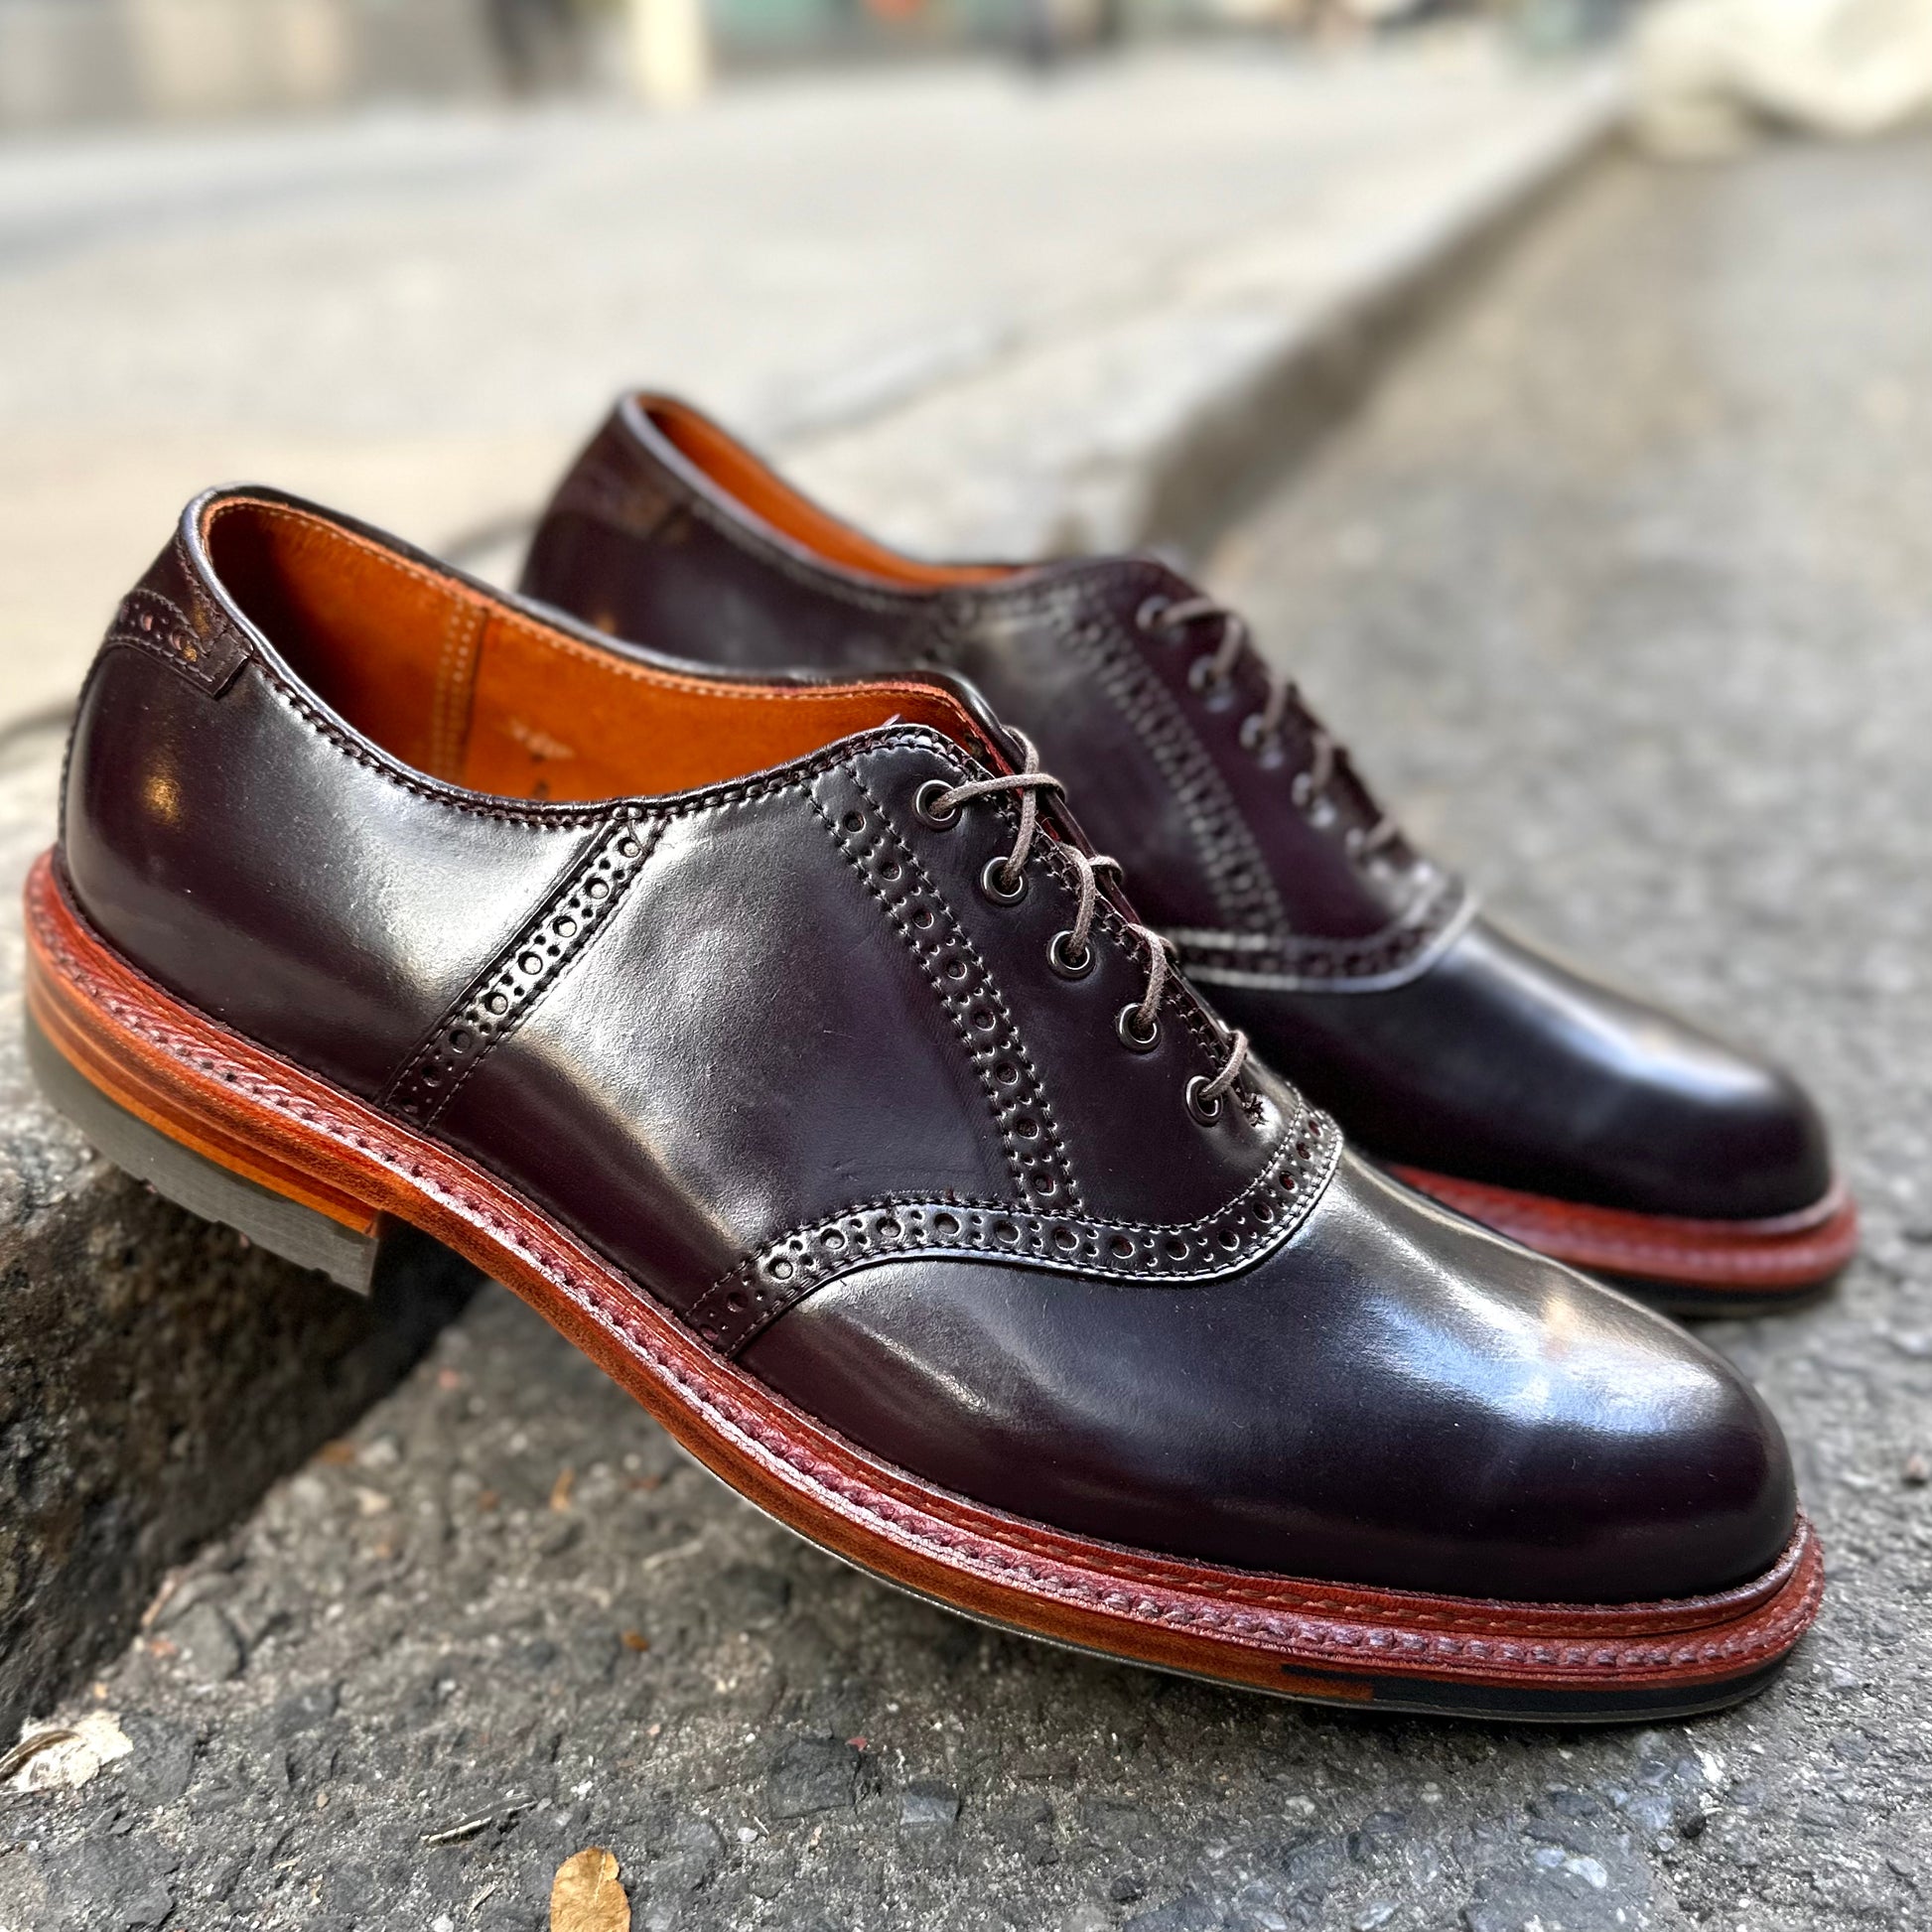 D2305C - Saddle Oxford in Color 8 Shell Cordovan – Alden Madison